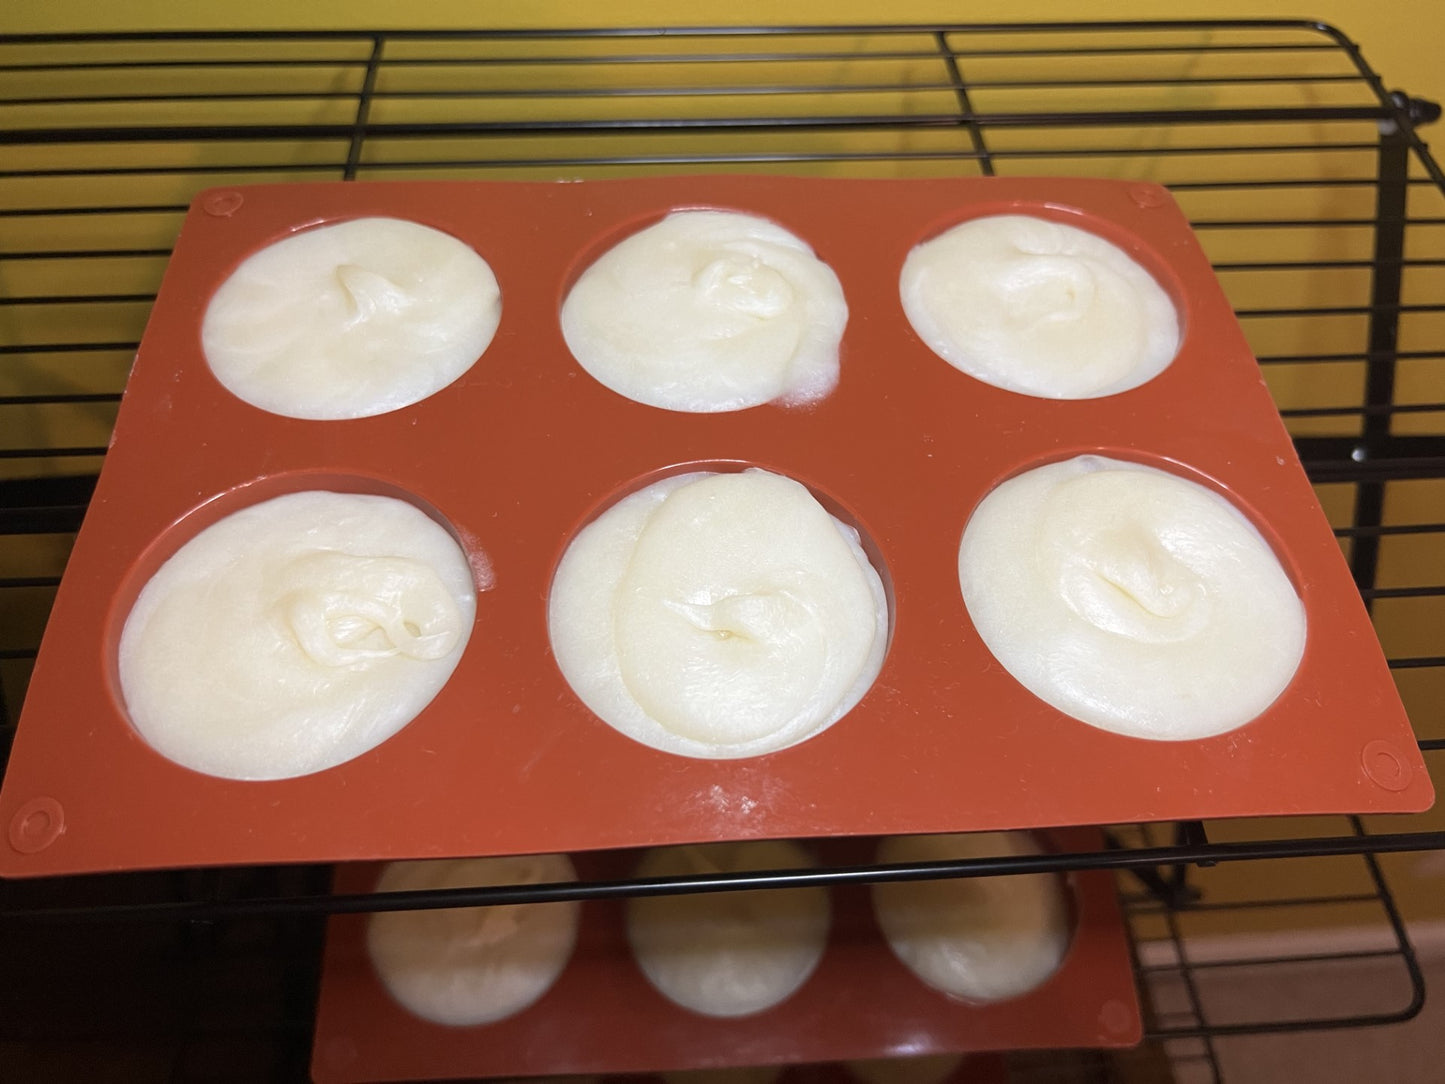 Shave Soap - 2 for $20